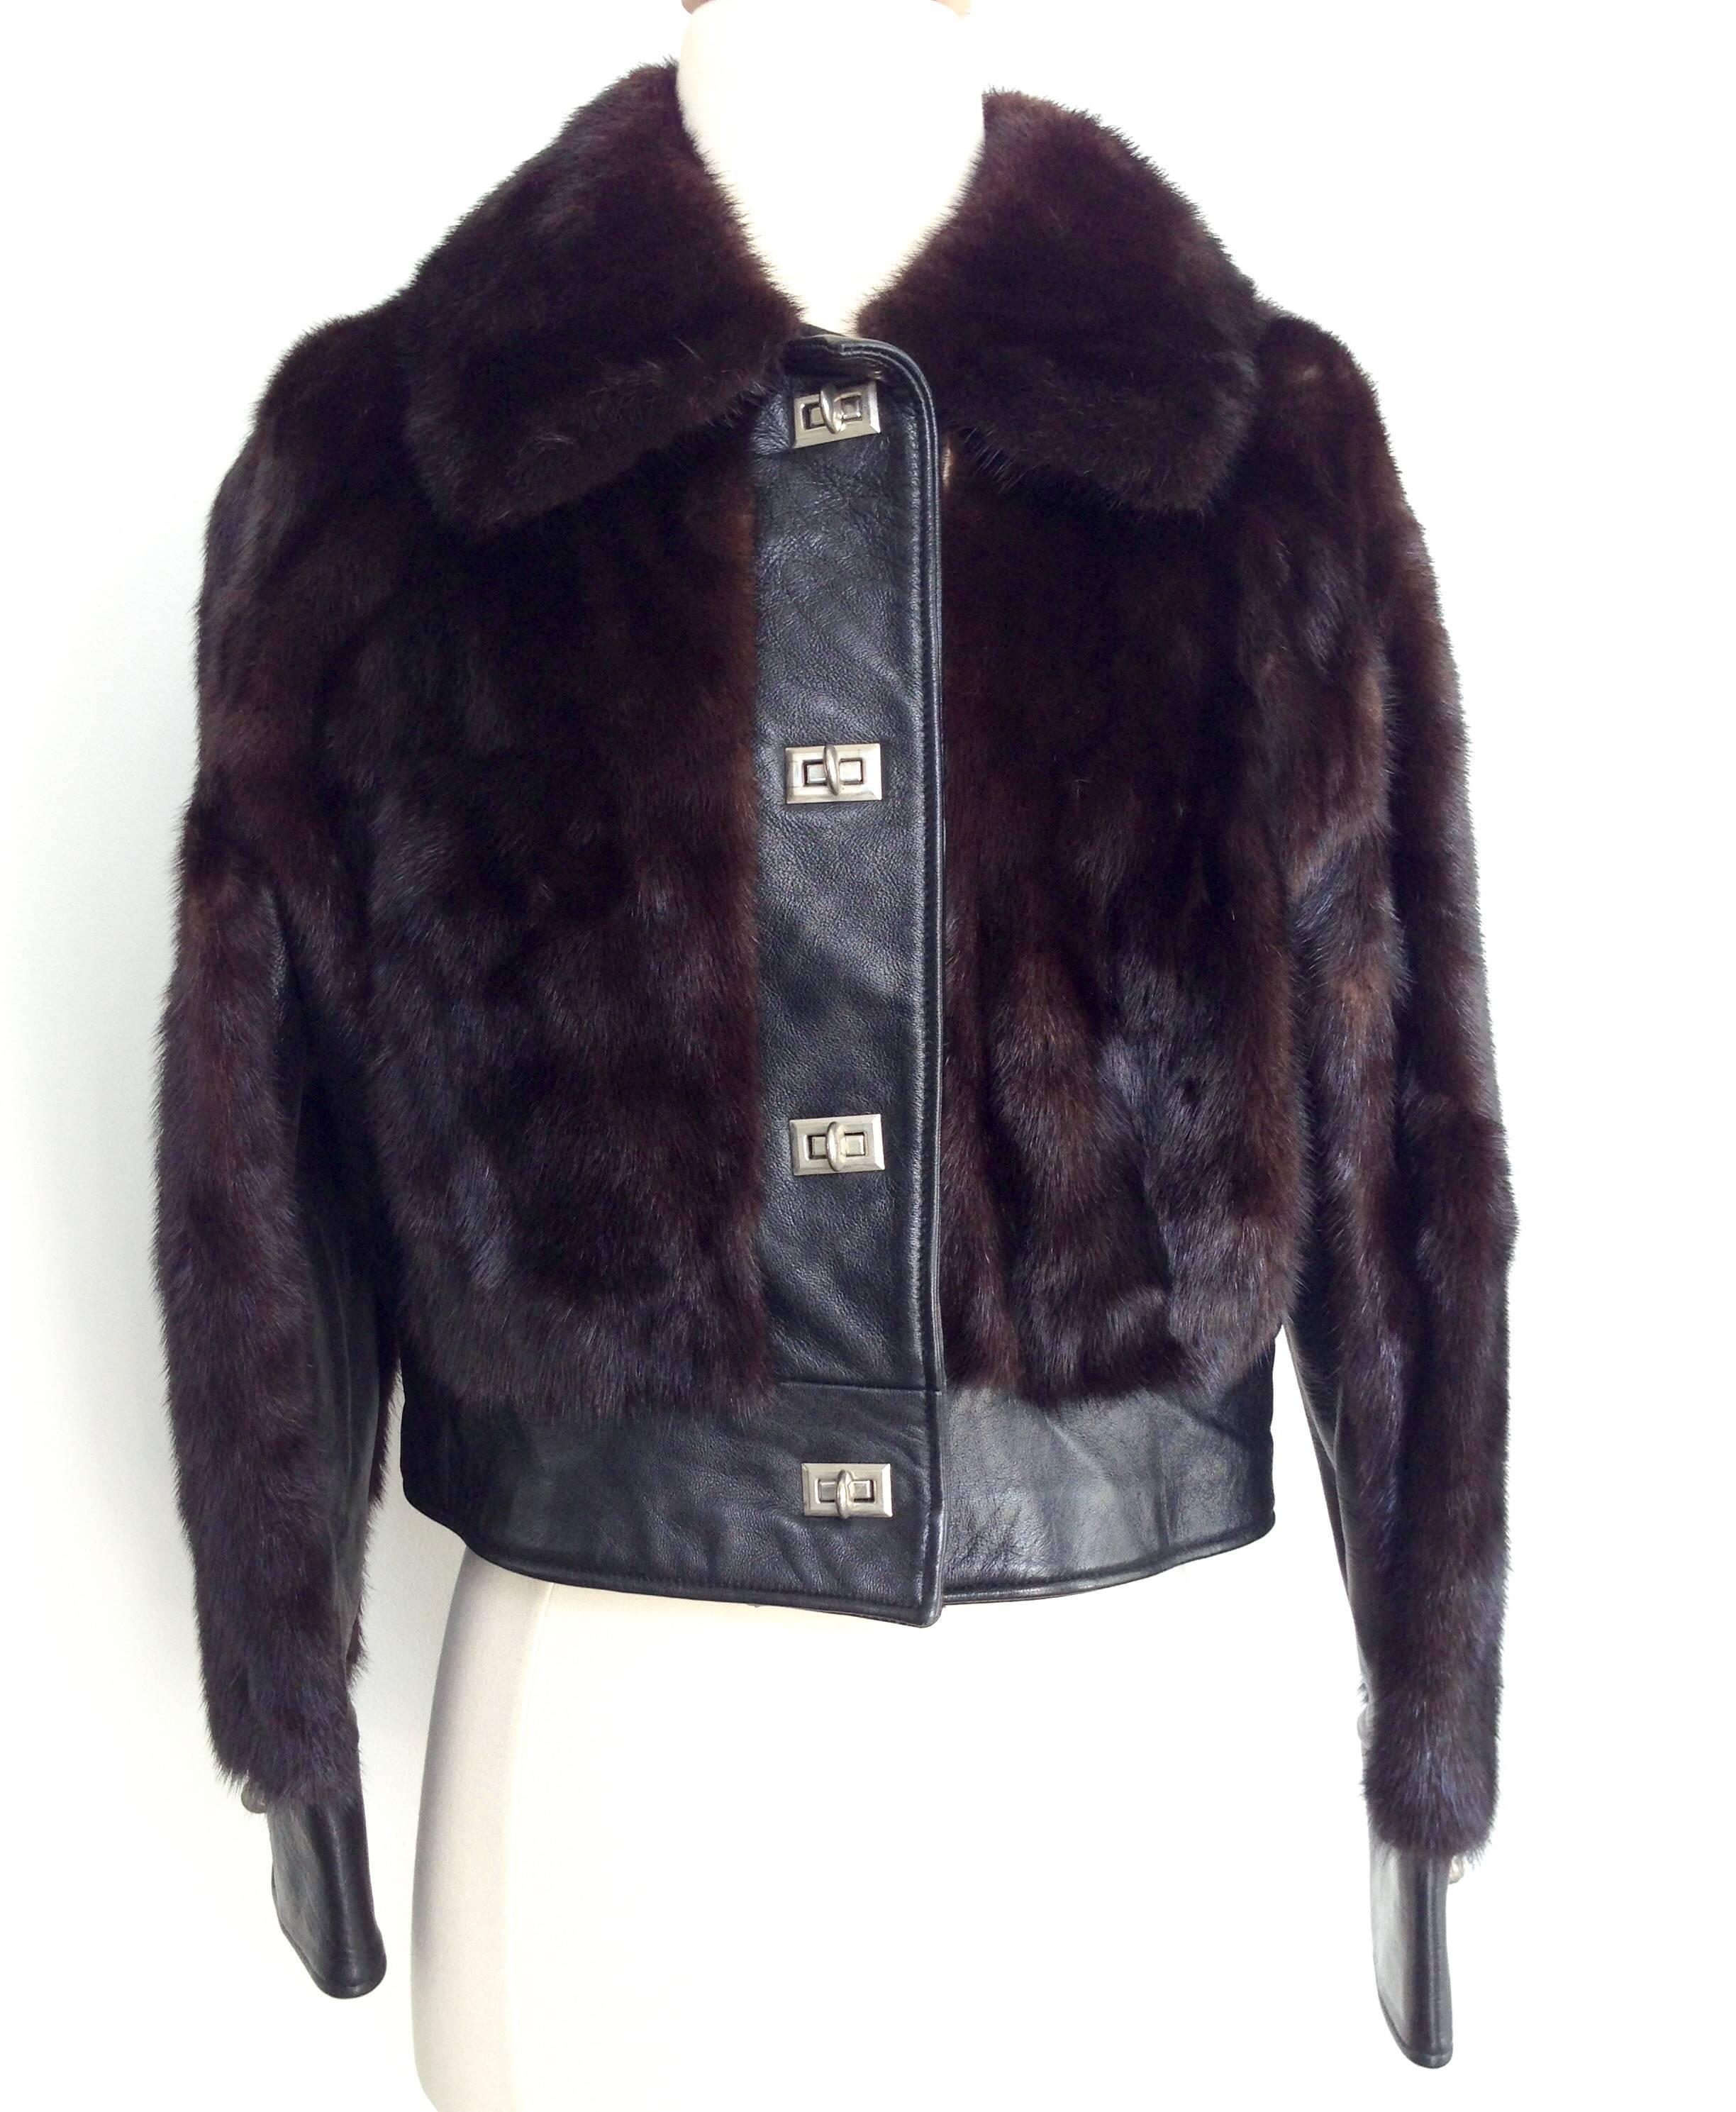 1970'S MOD Gucci Style Mink Fur & Leather Silver Chrome Toggle Convertible Two Piece Full Length Coat Or Bomber Jacket. Features, chocolate brown mink fur and leather panel design with silver chrome toggle hardware. This rare coat converts to a